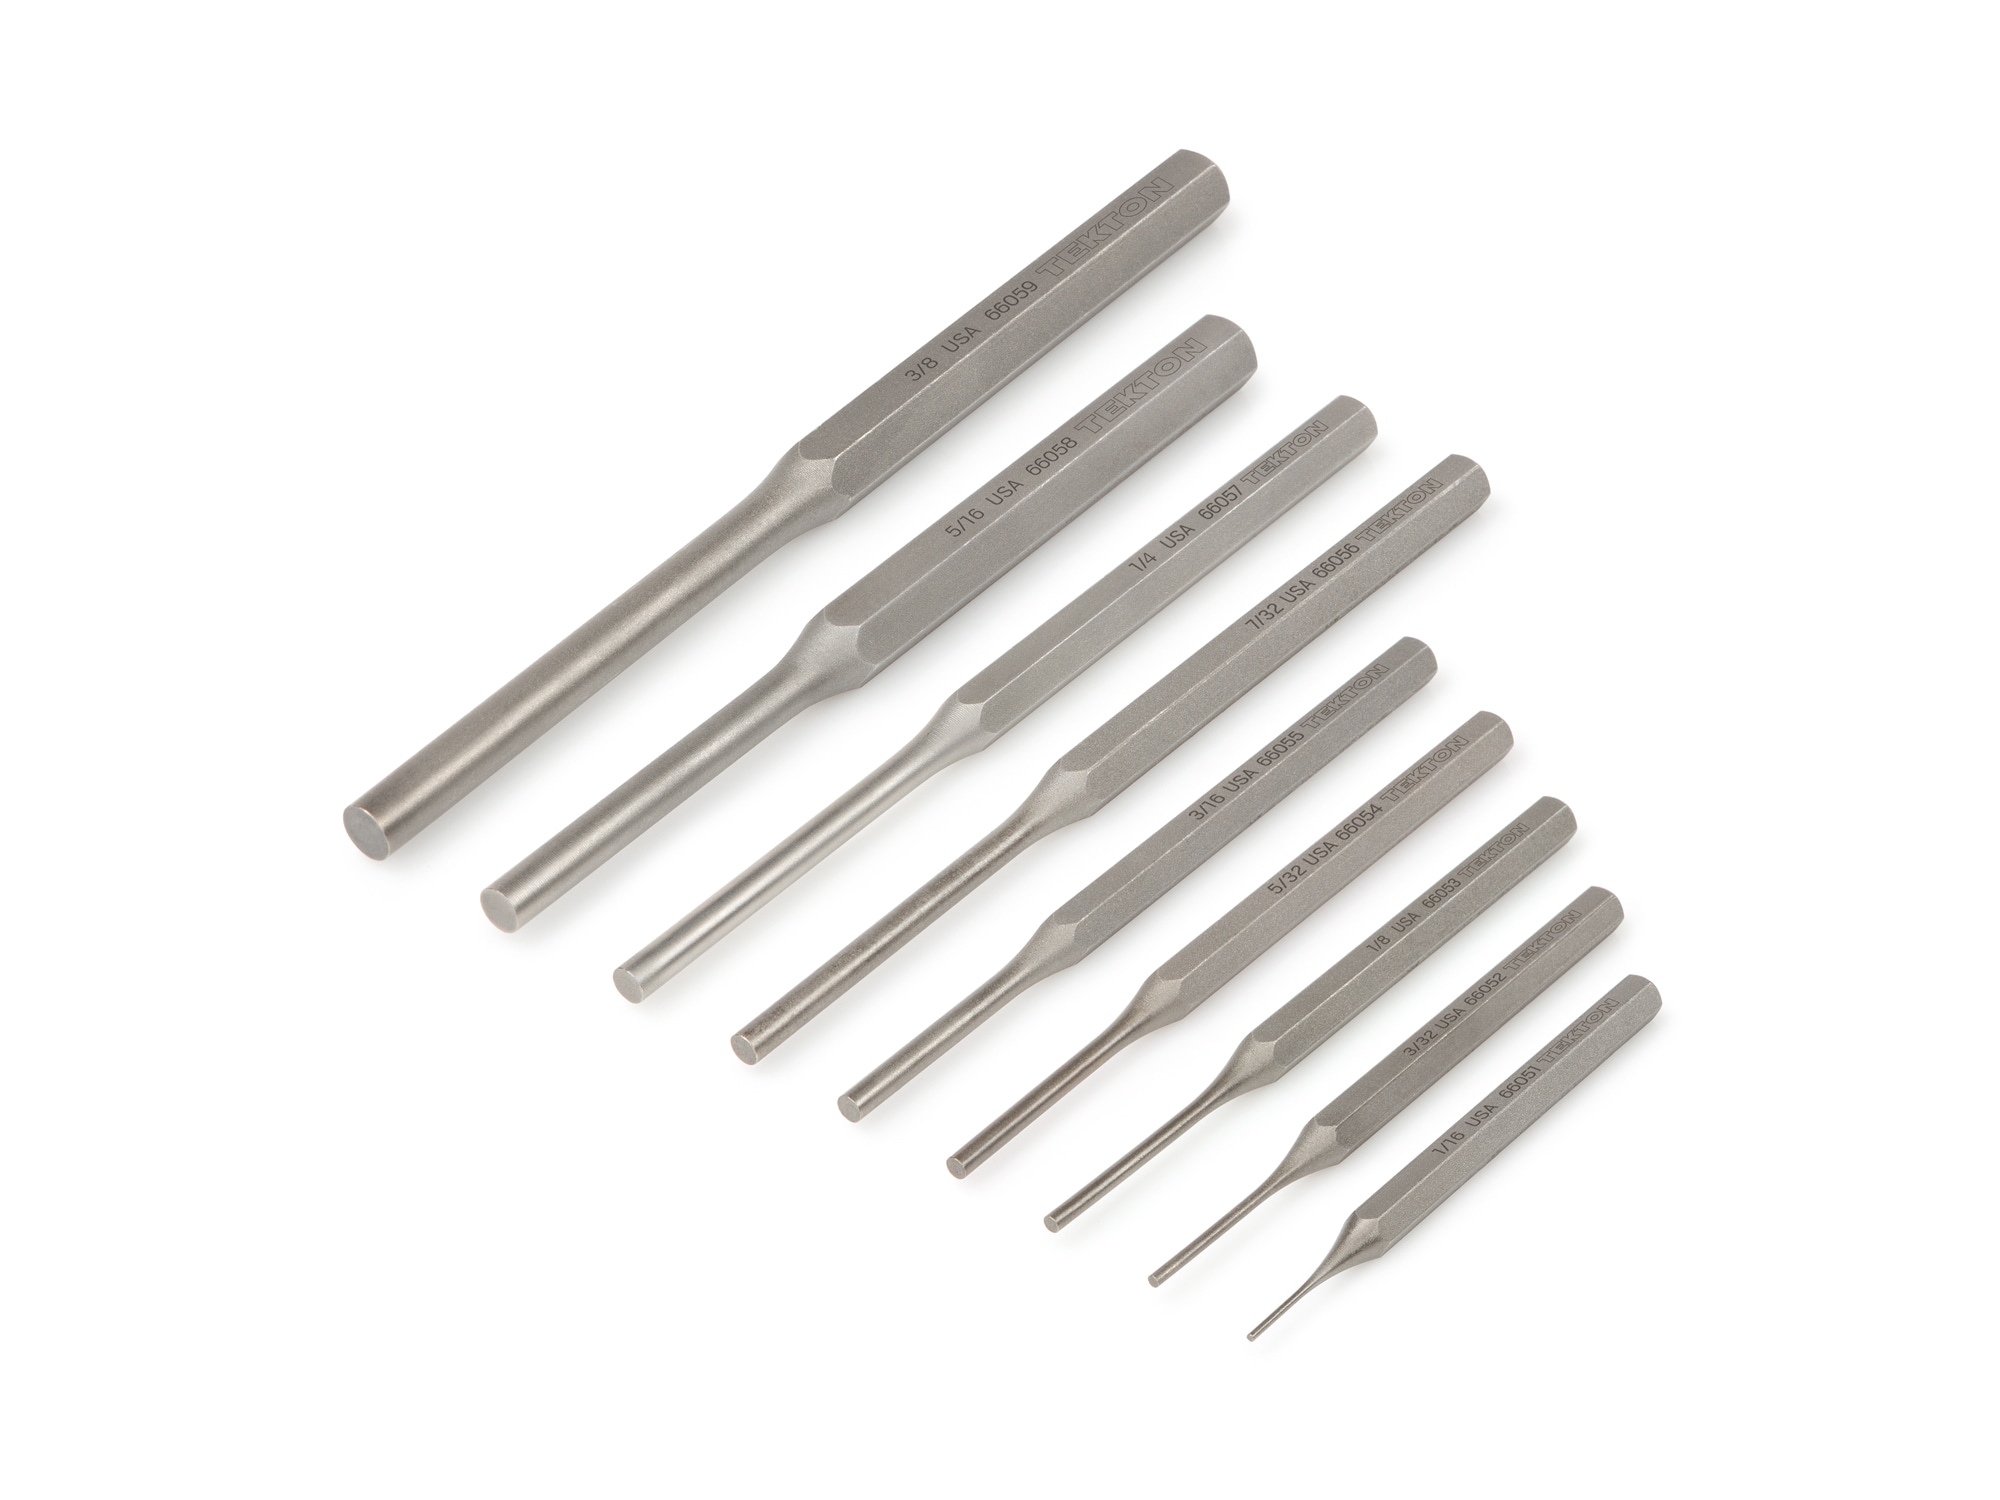 Roll Pin Punch Set Tools for Remove Pin or Latch of Any Mechanic